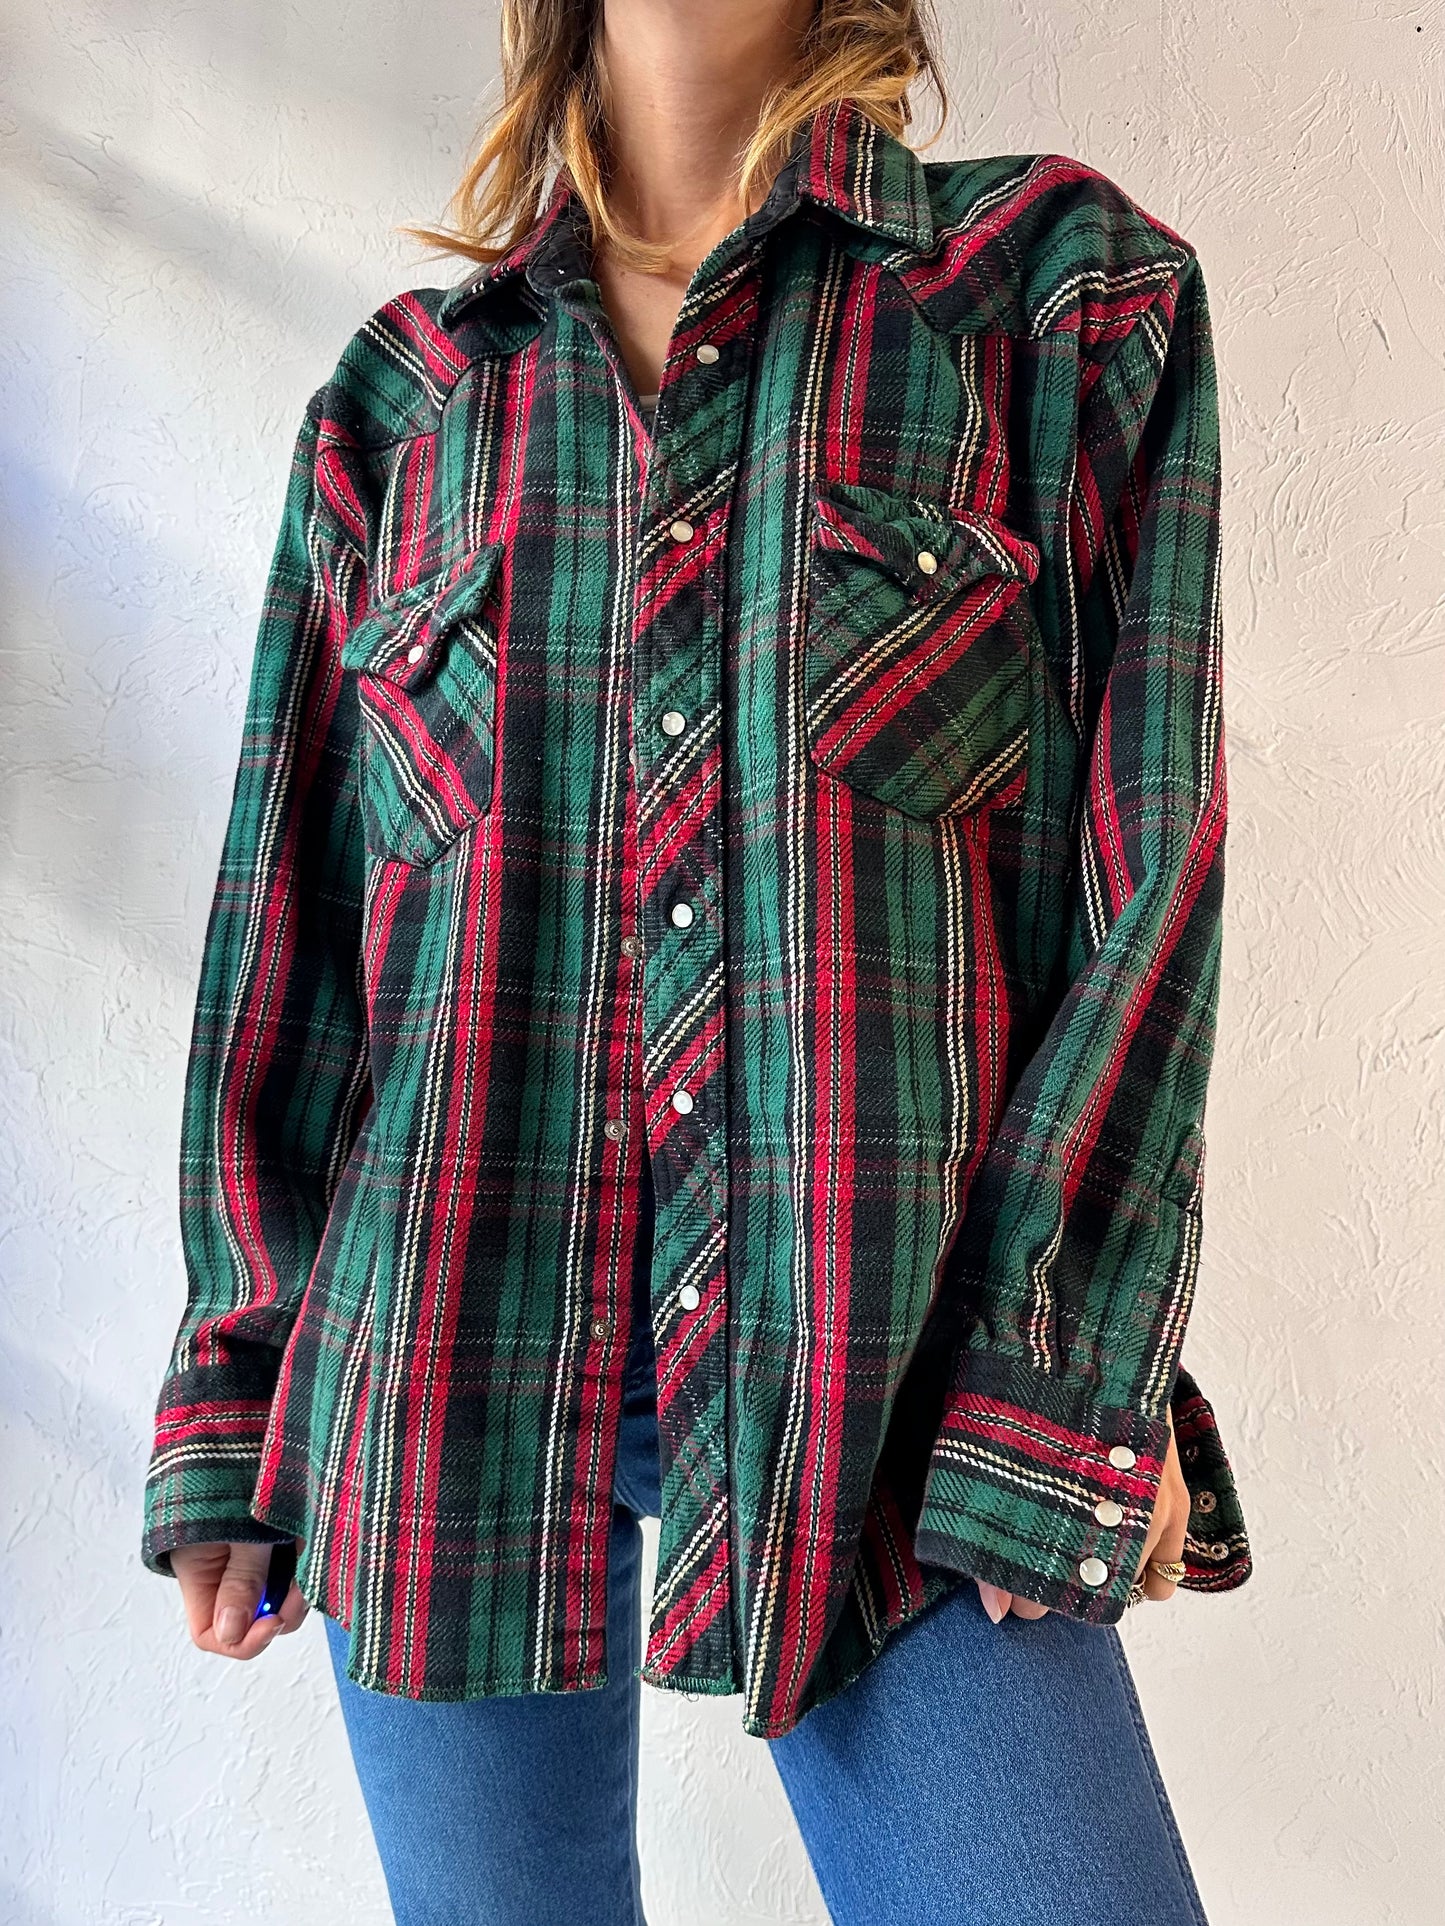 Vintage 'Wrangler' Thick Cotton Plaid Western Pearl Snap Shirt / Large